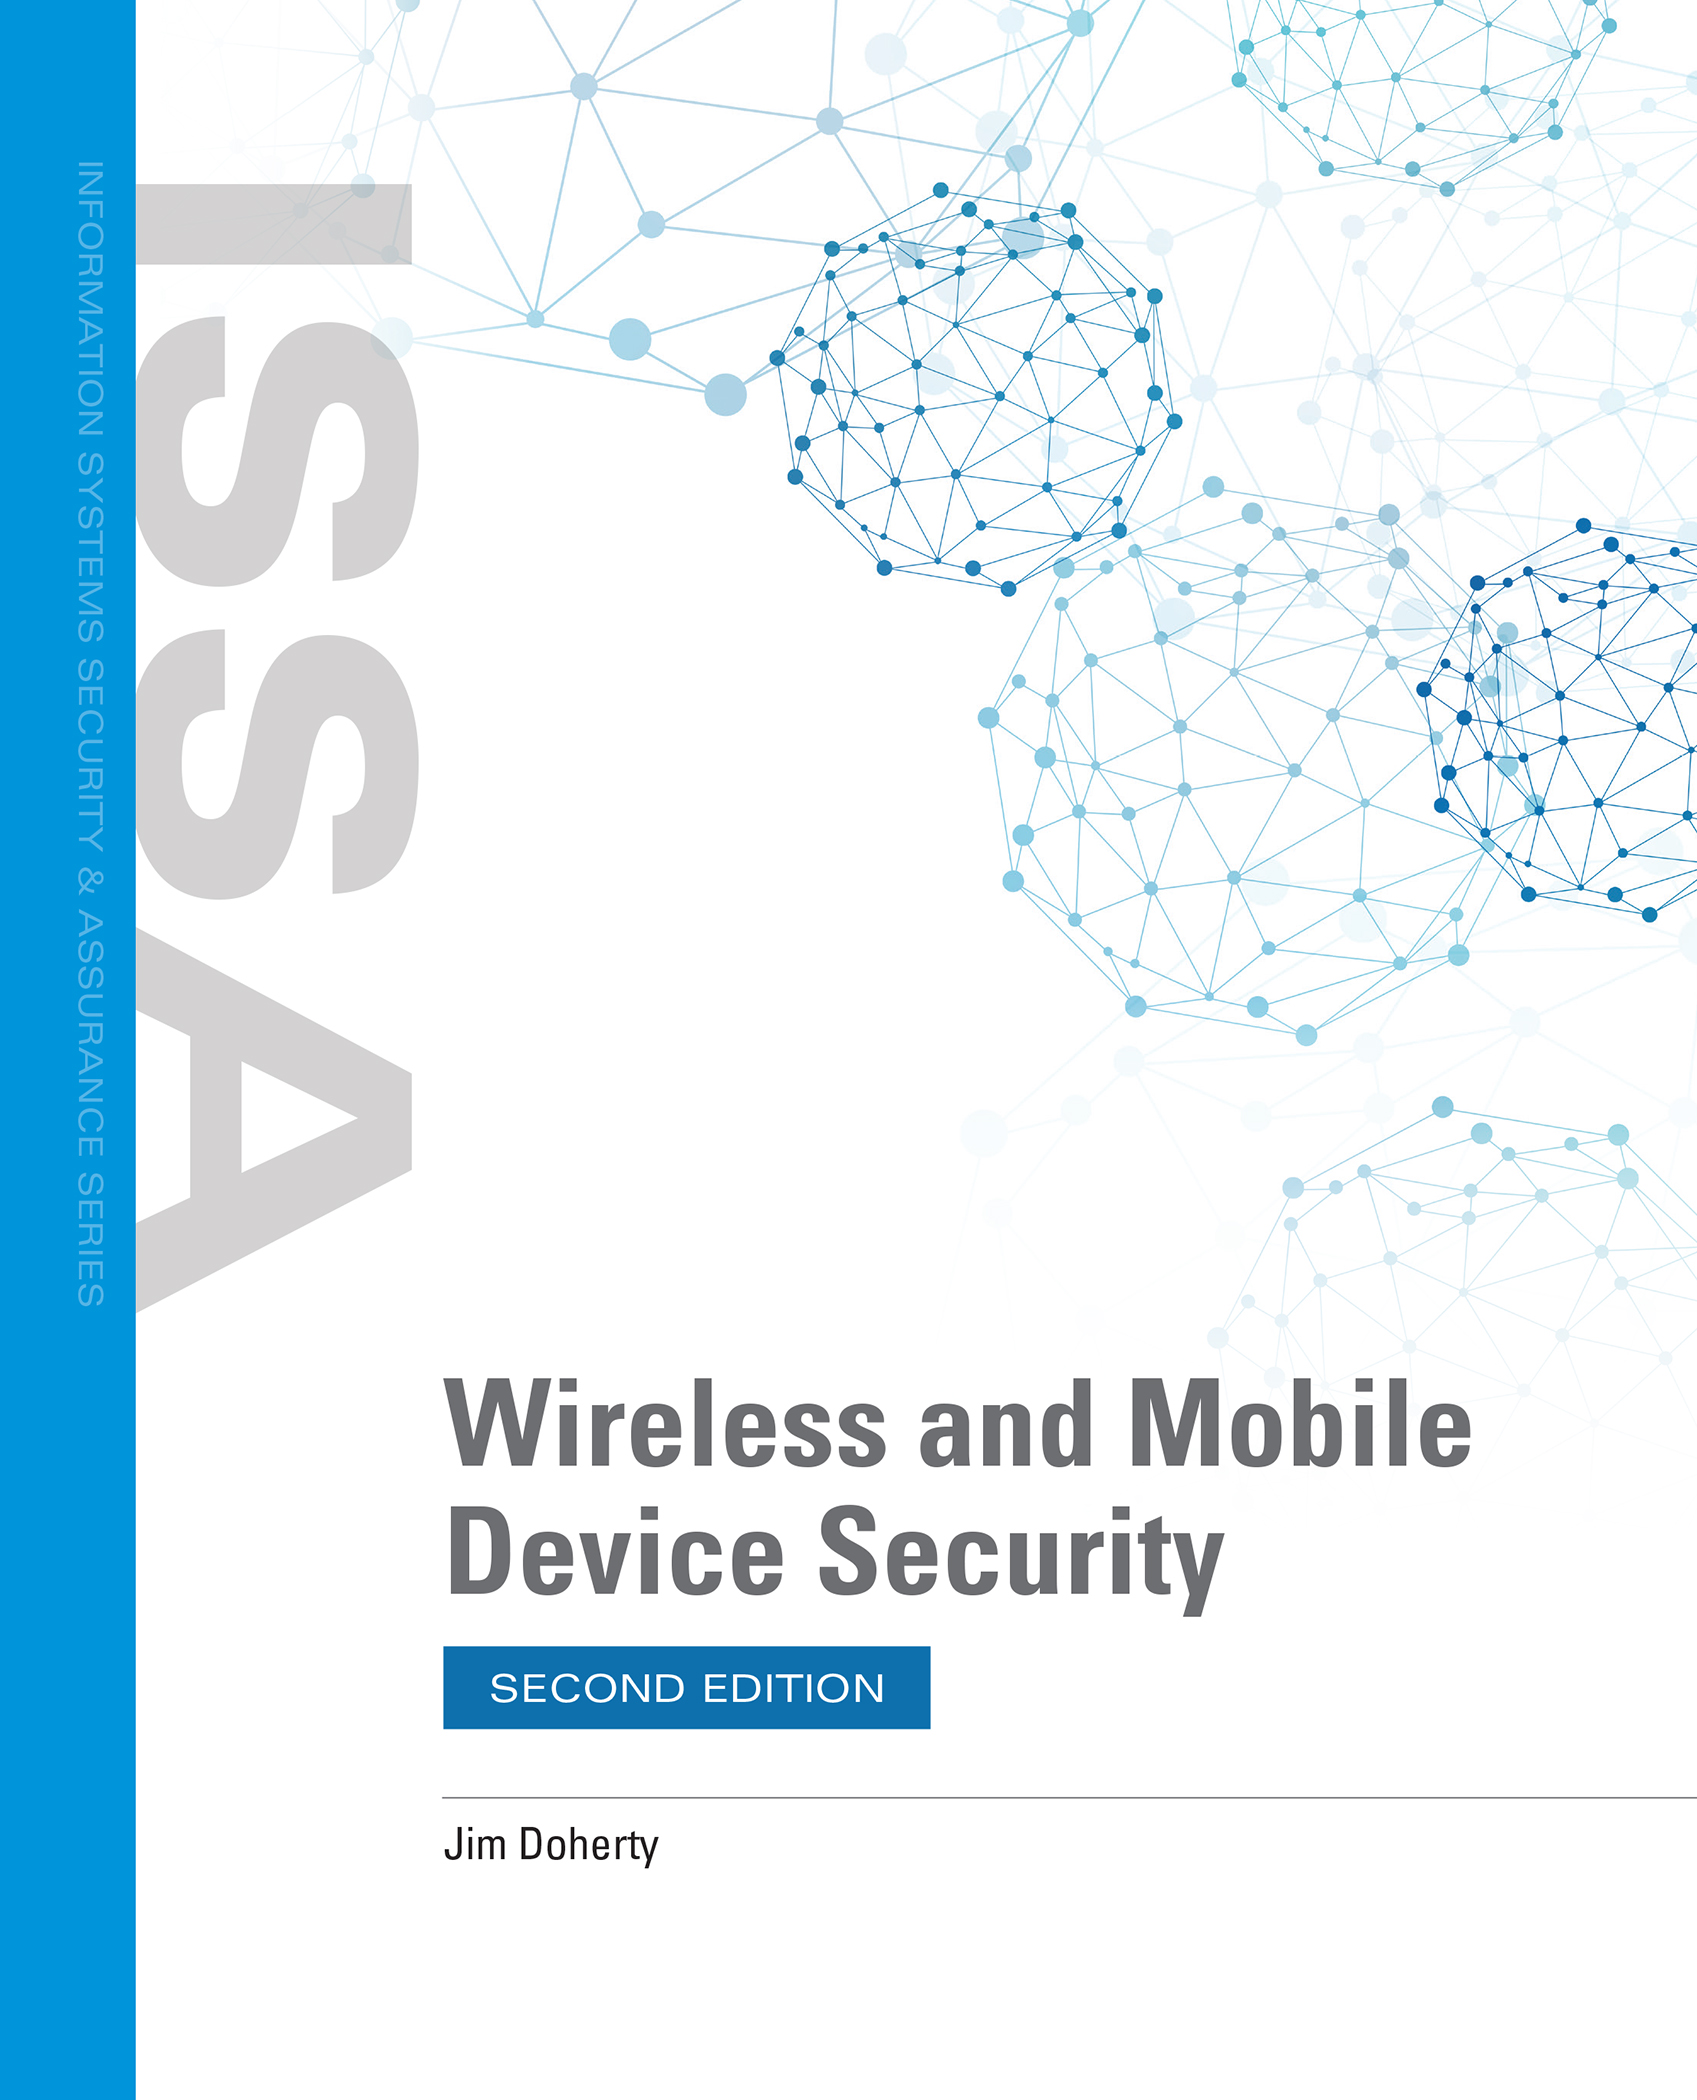 A cover page shows the series title ISSA (Information Systems Security and Assurance series) and the book title Wireless and Mobile Device Security, Second Edition. The author is Jim Doherty. The Jones and Bartlett Learning logo is seen in the left tab of the page along with the series title and the book title again. An image of interconnected network points forming multiplaned structures of different sizes can be seen in the background.